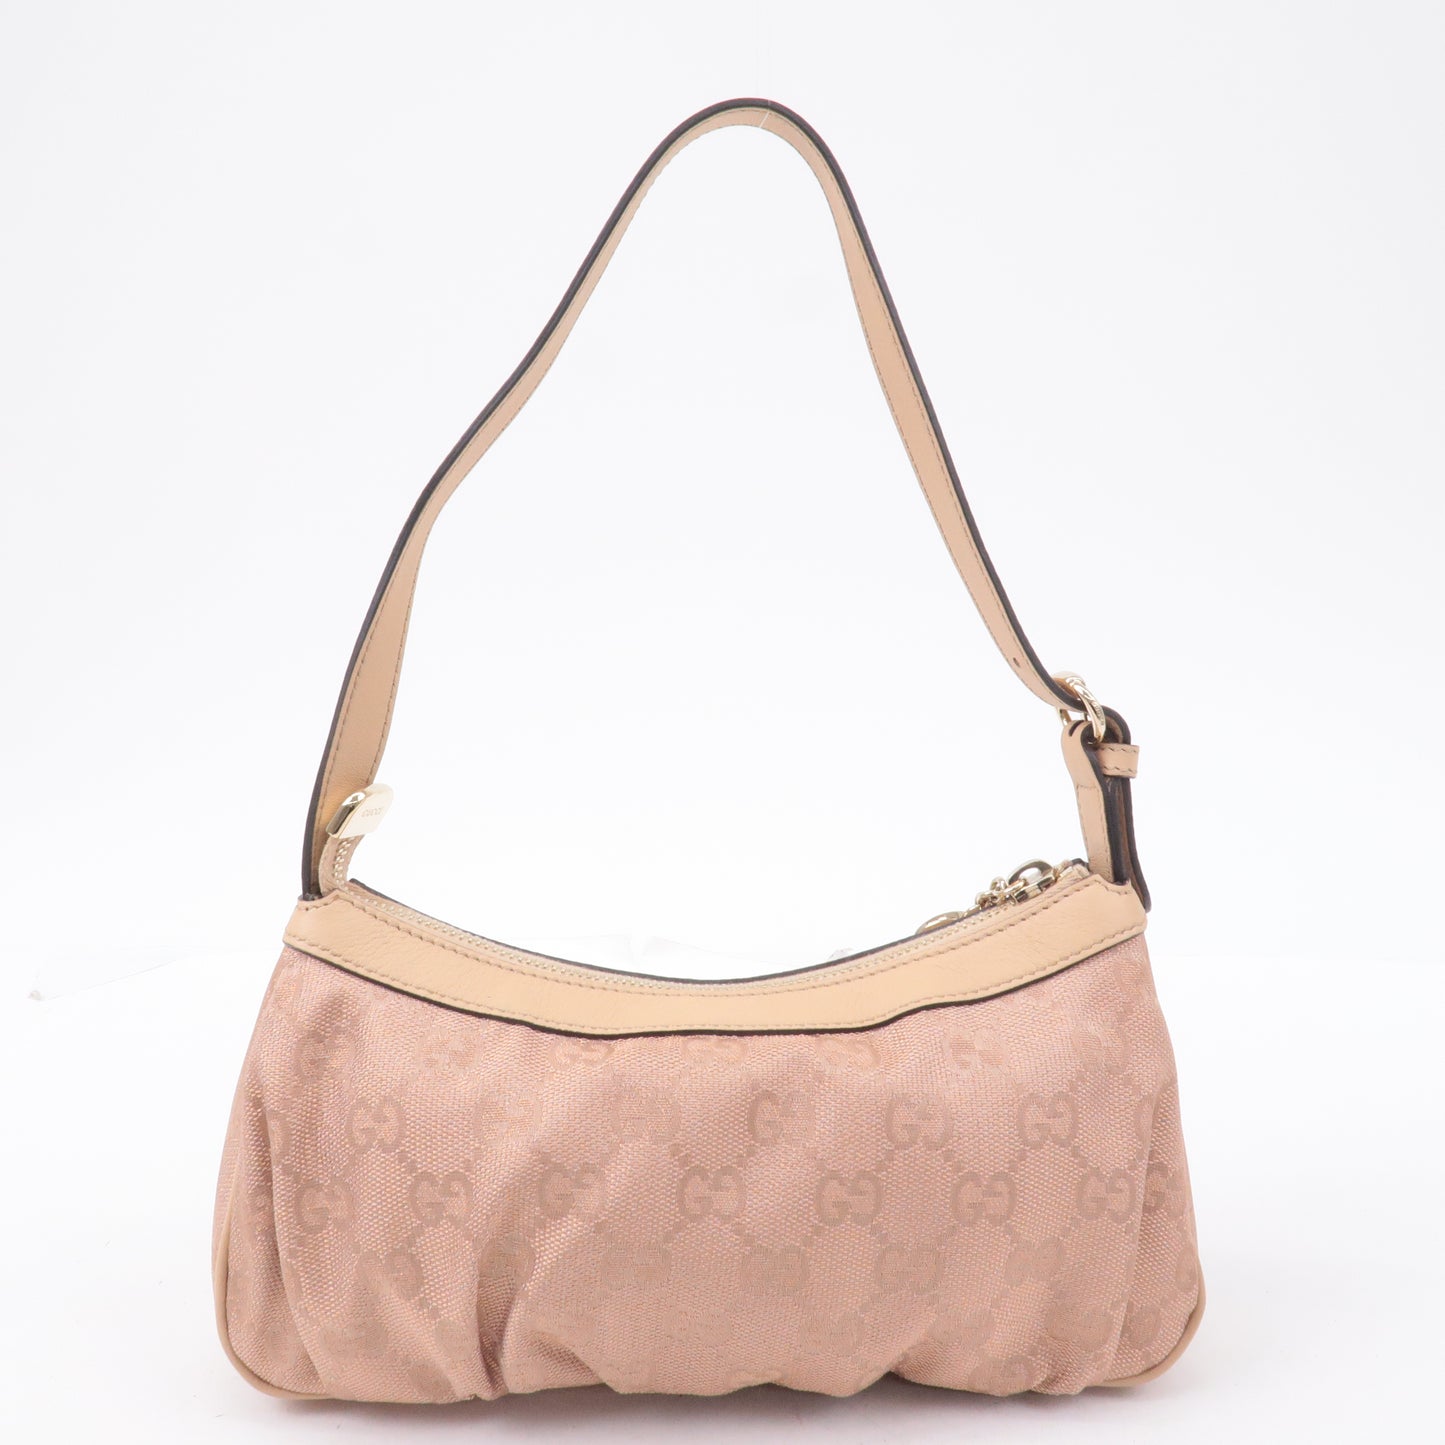 GUCCI Lovely GG Canvas Leather Hand Bag Pink Beige 245938